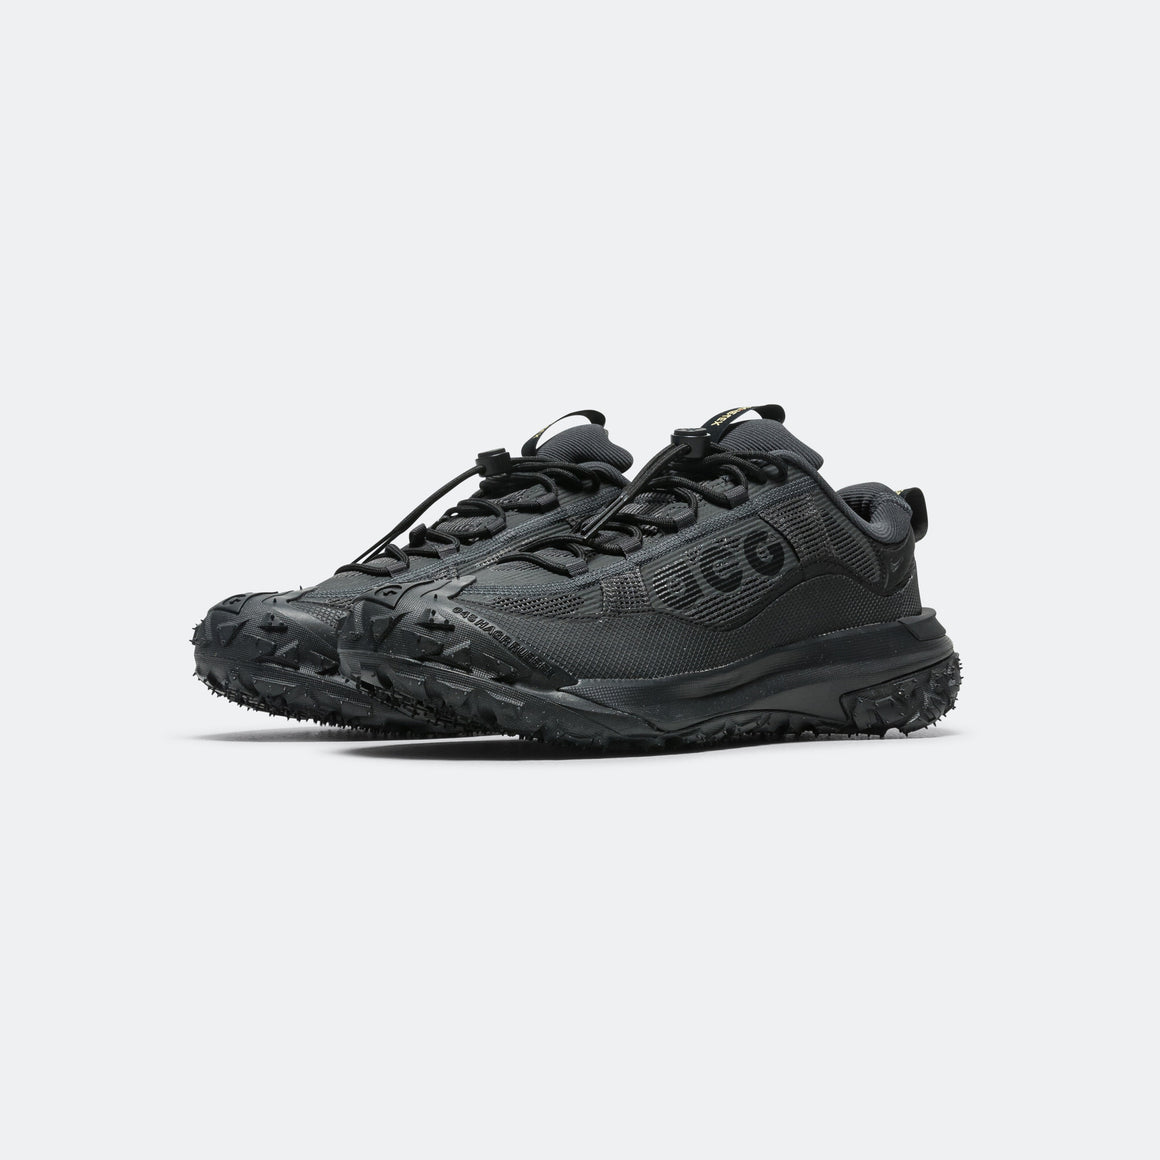 Nike ACG - Mountain Fly 2 Low GORE-TEX - Dk Smoke Grey/Black-Anthracite - UP THERE